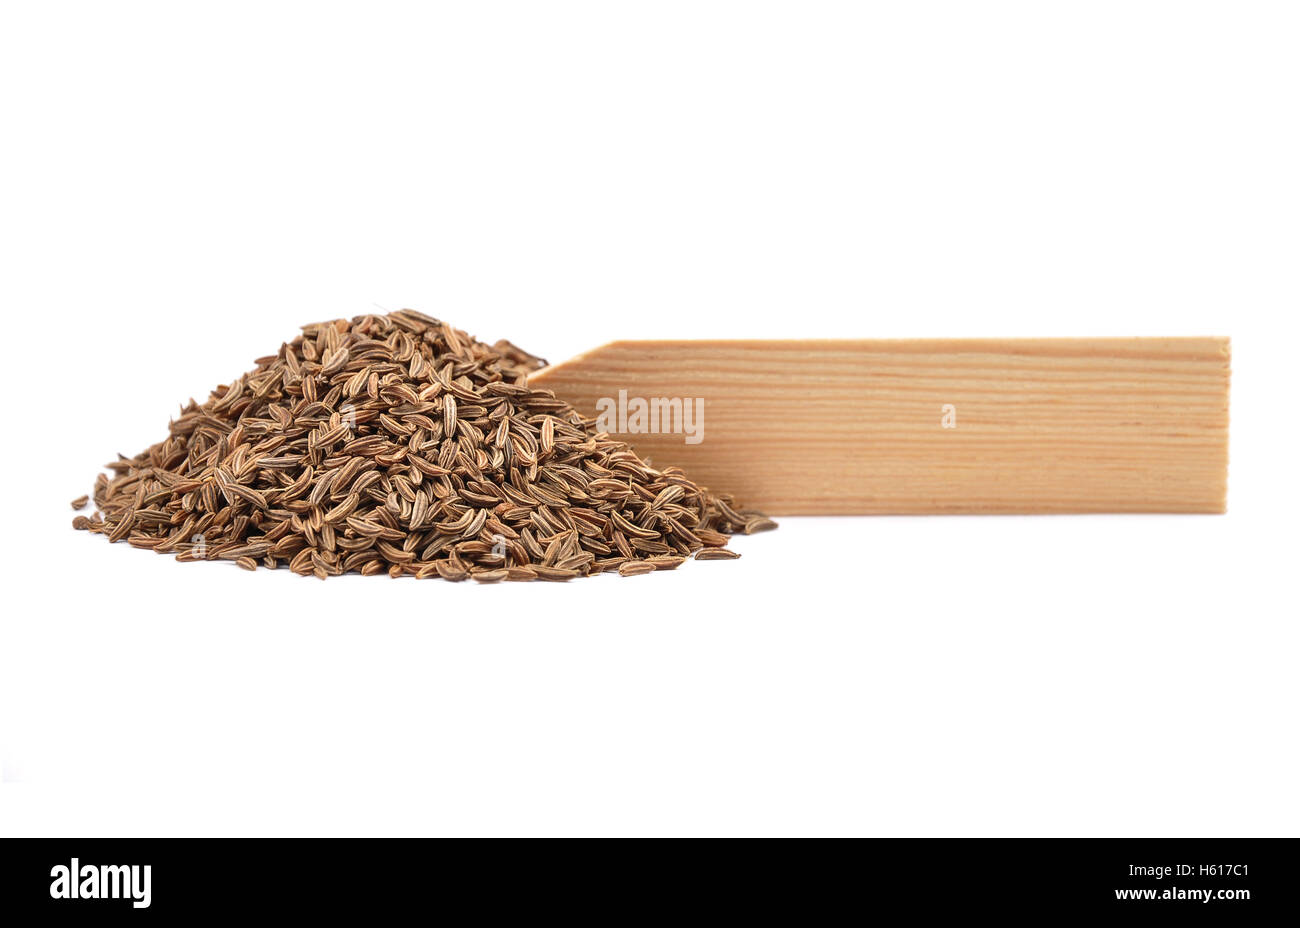 Caraway seeds on plate Stock Photo